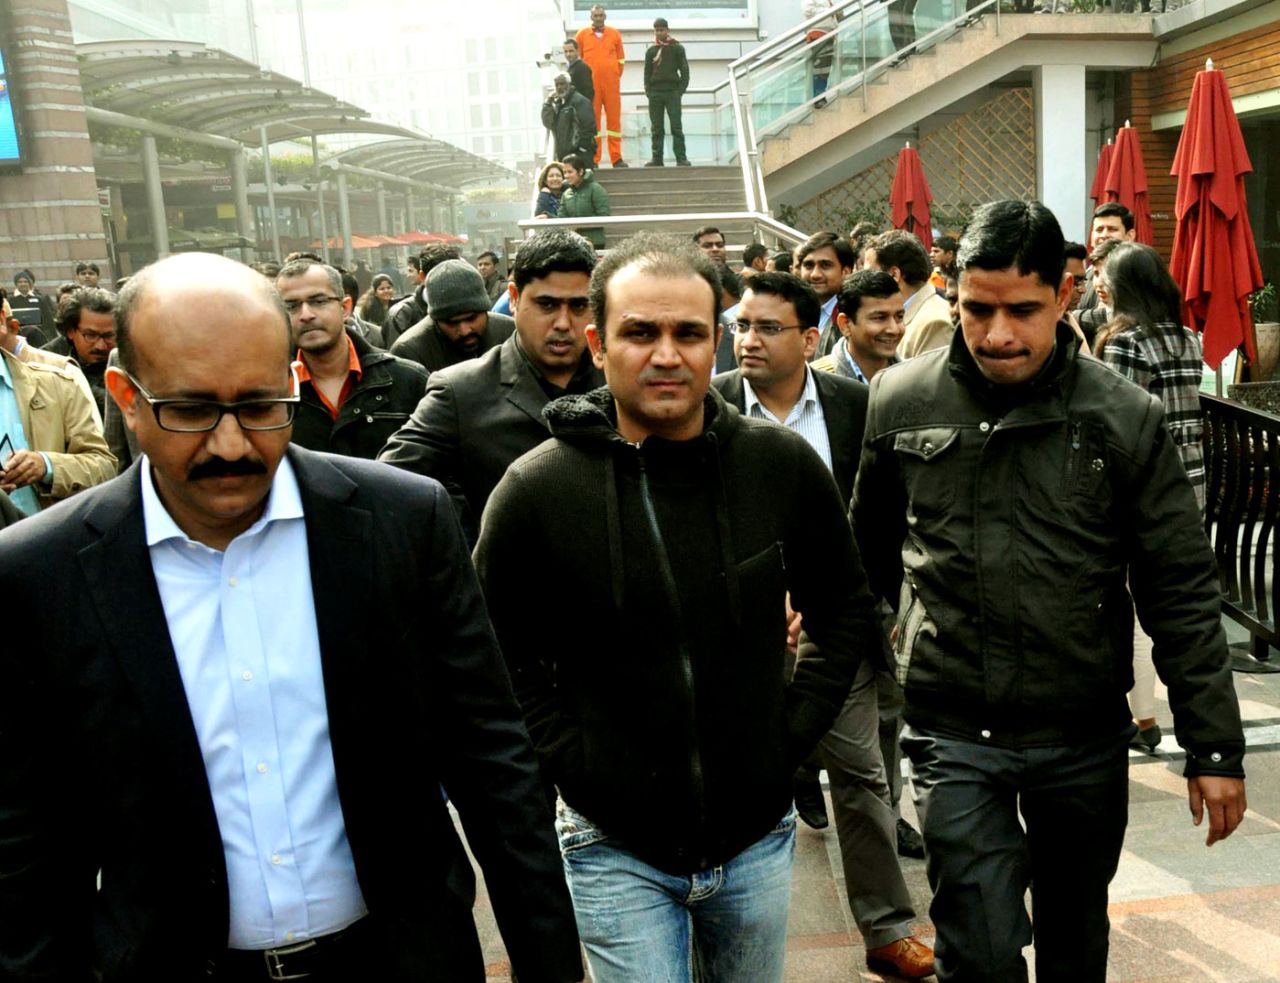 Virender Sehwag attends a World Cup event in Gurgaon, January 8, 2015